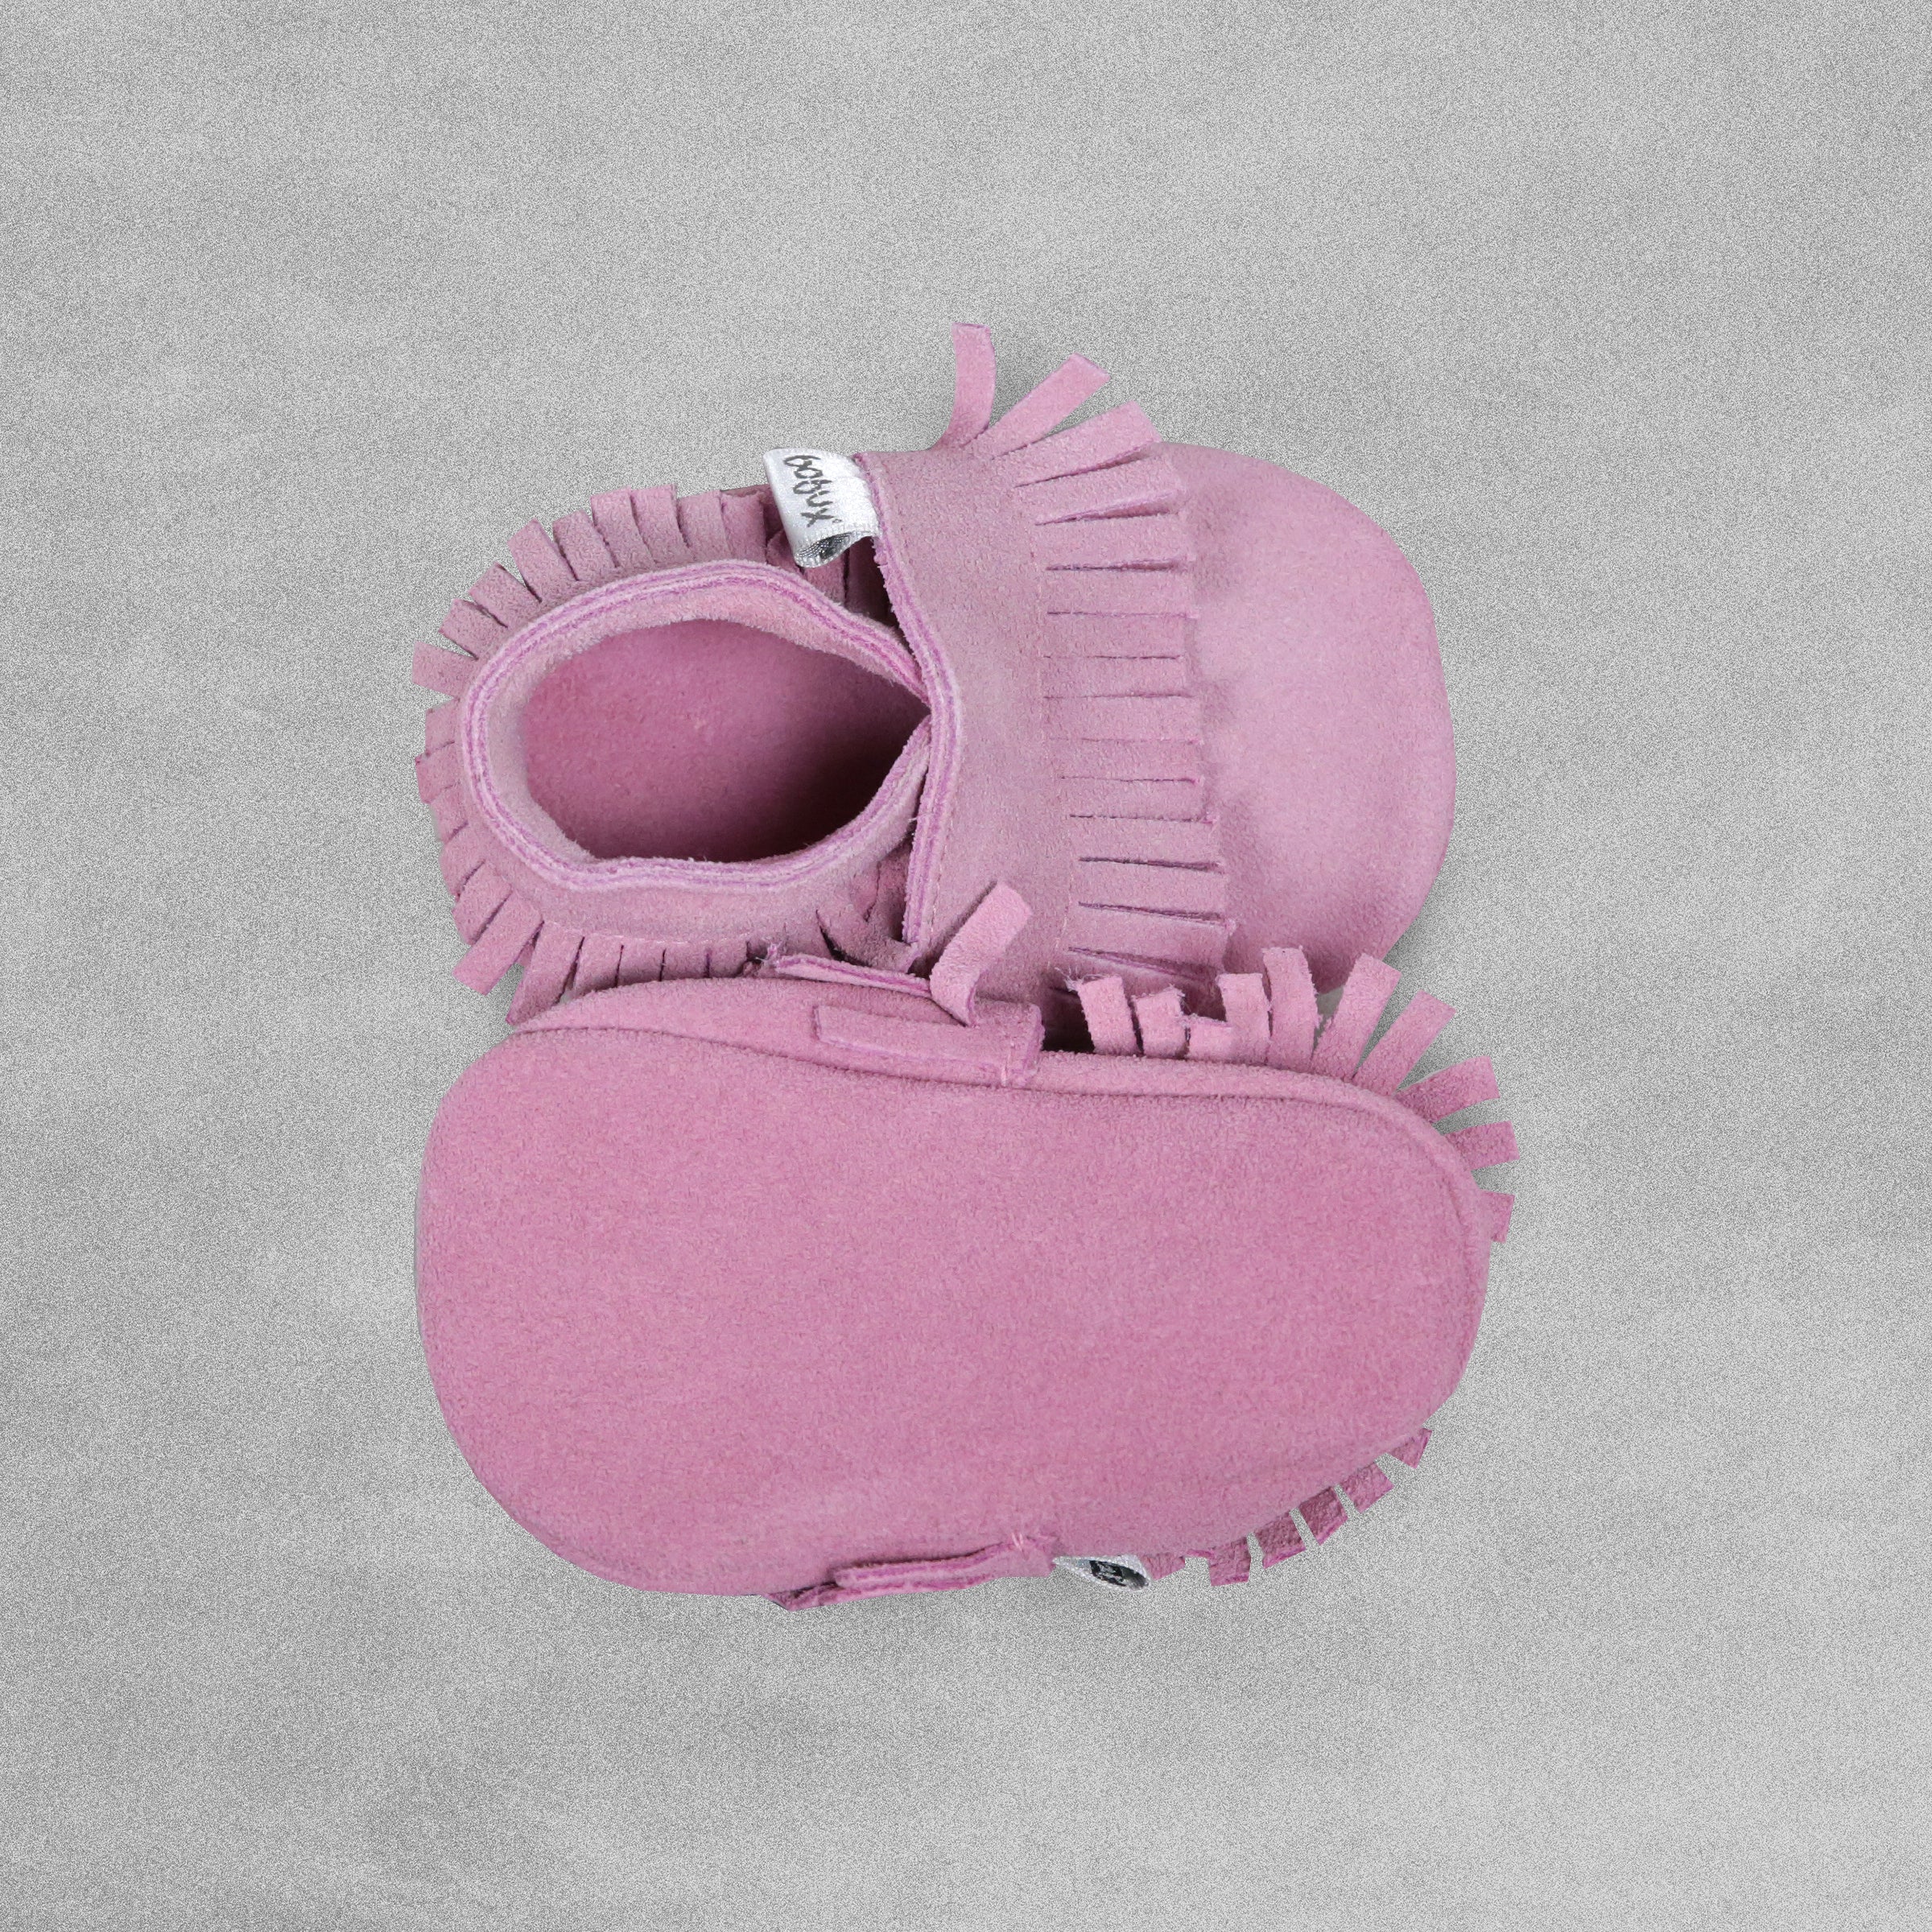 Bobux Soft Sole Baby Shoe 'Pink Moccasin' - Small /3-9 Months